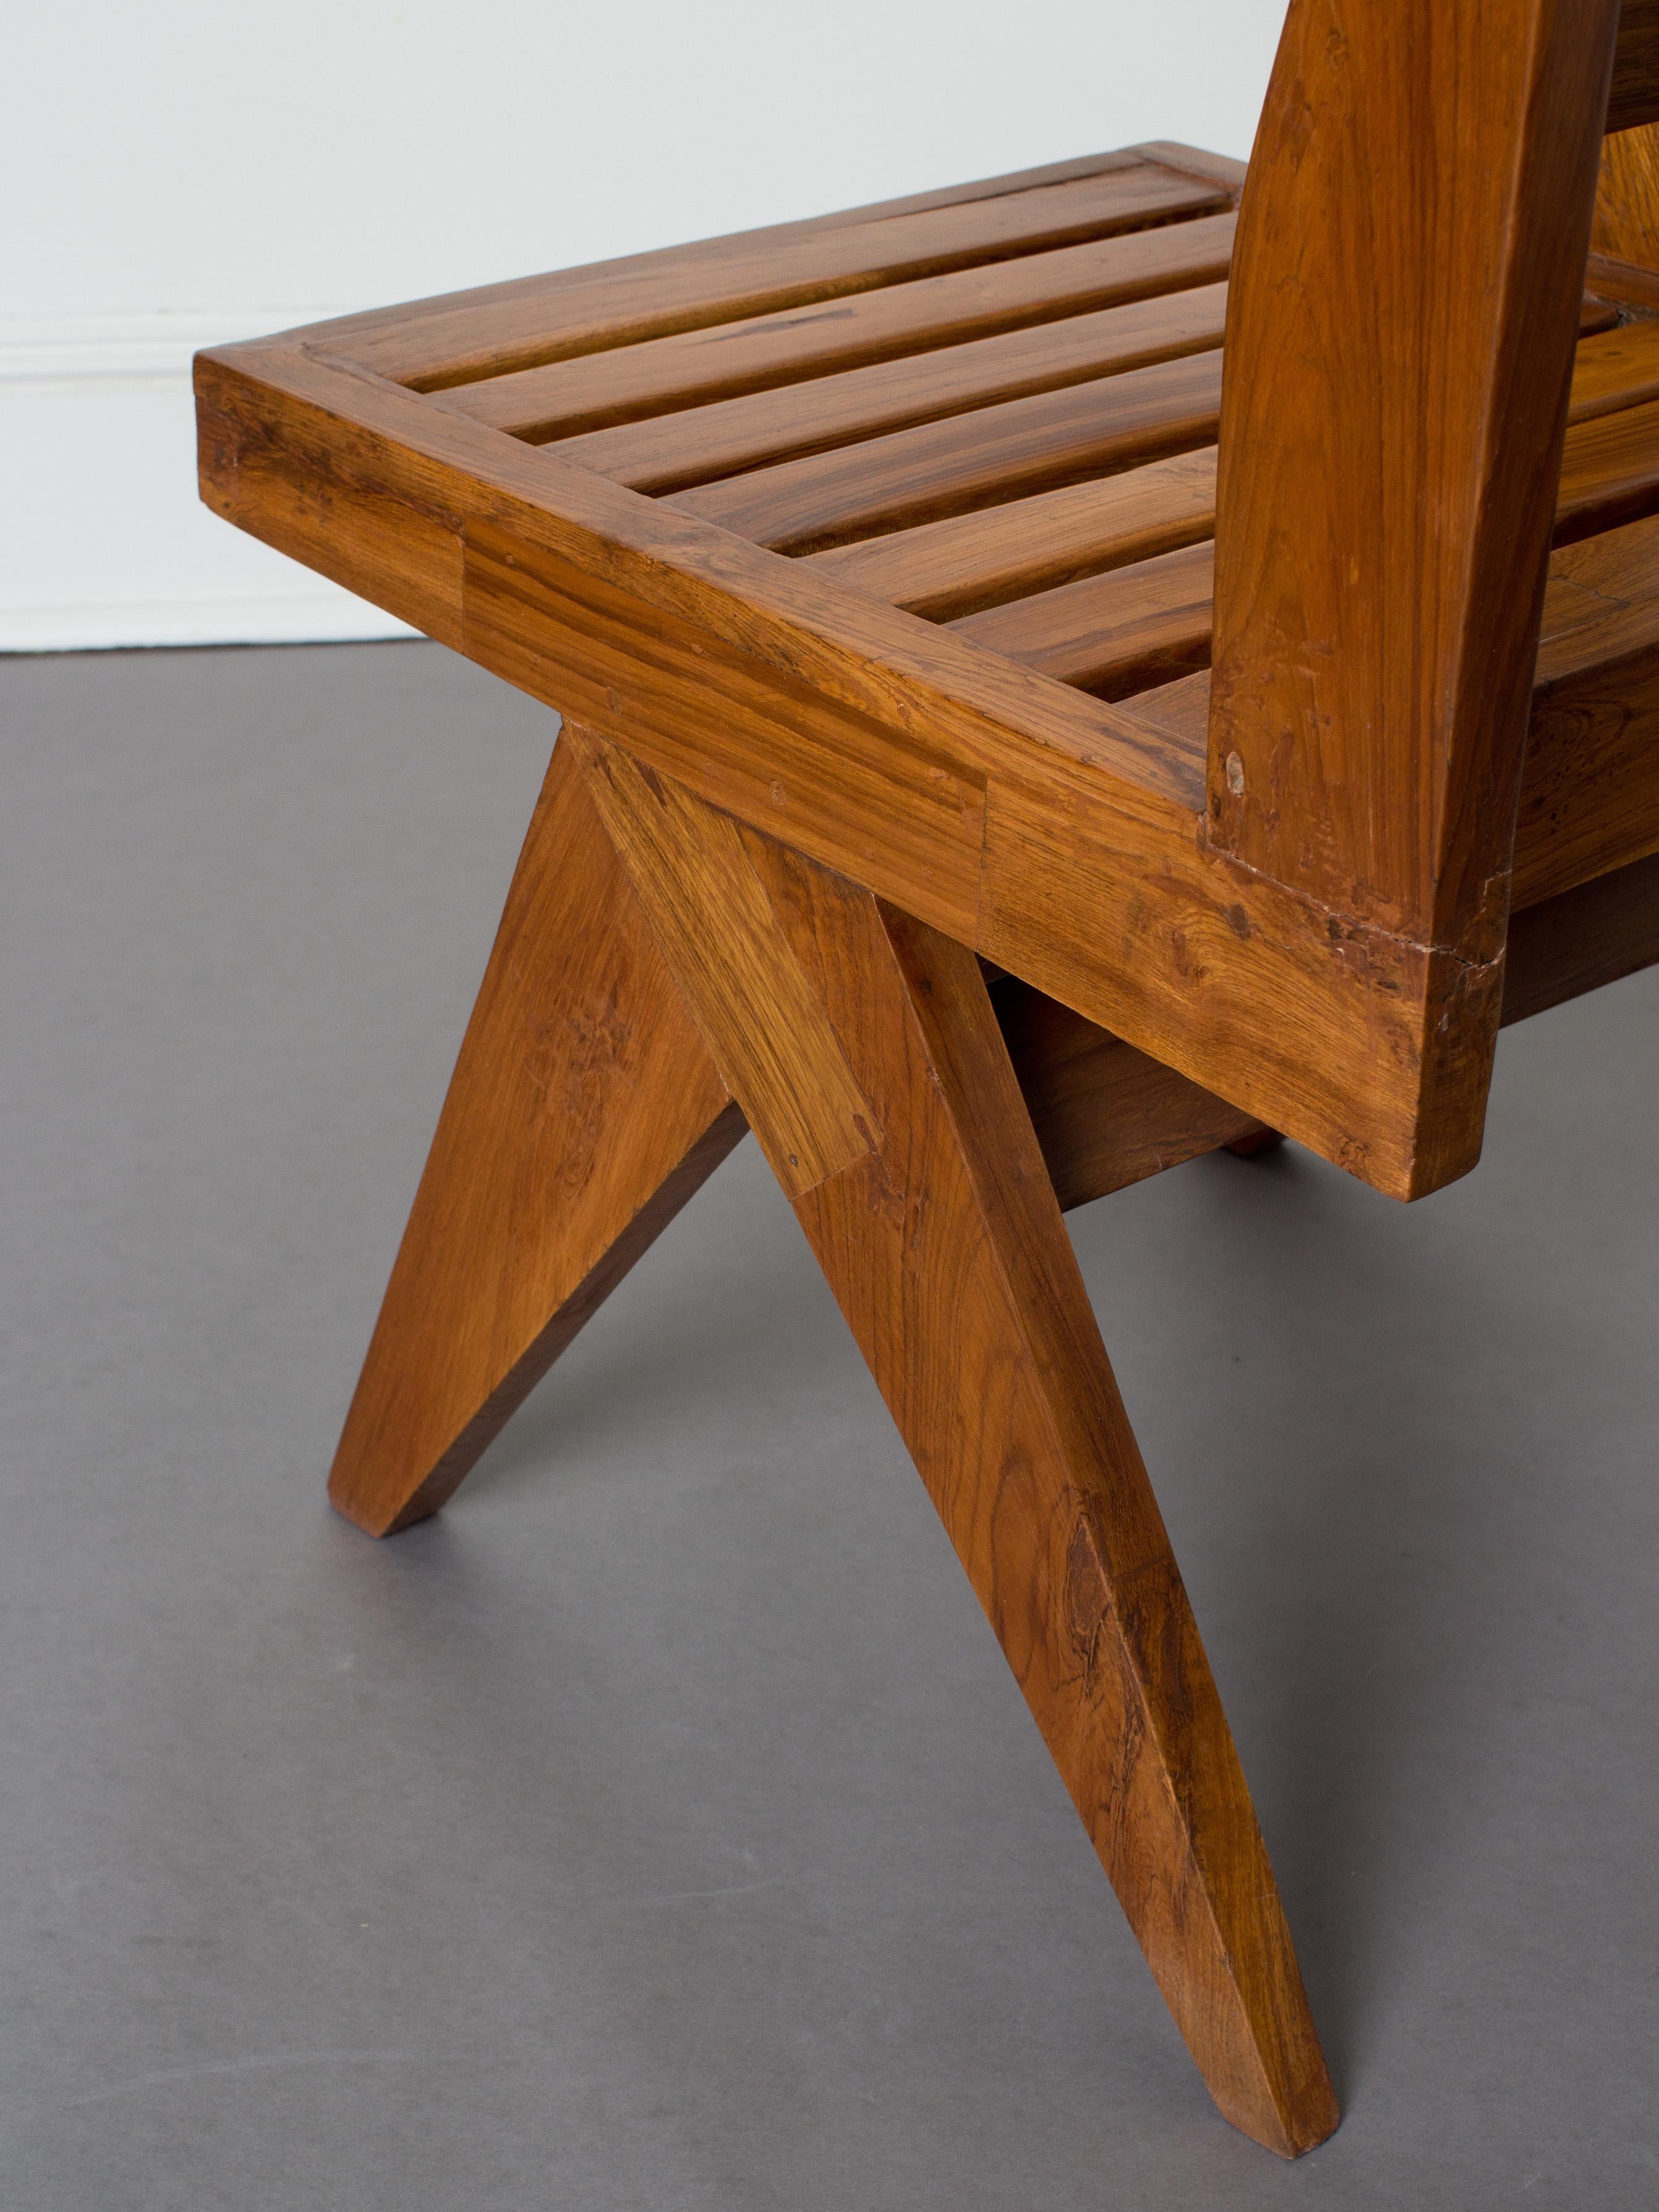 Pierre Jeanneret, Circa 1958
Slatted seat and back, single armed chair in teak.

Provenance: Chandigarh, India.